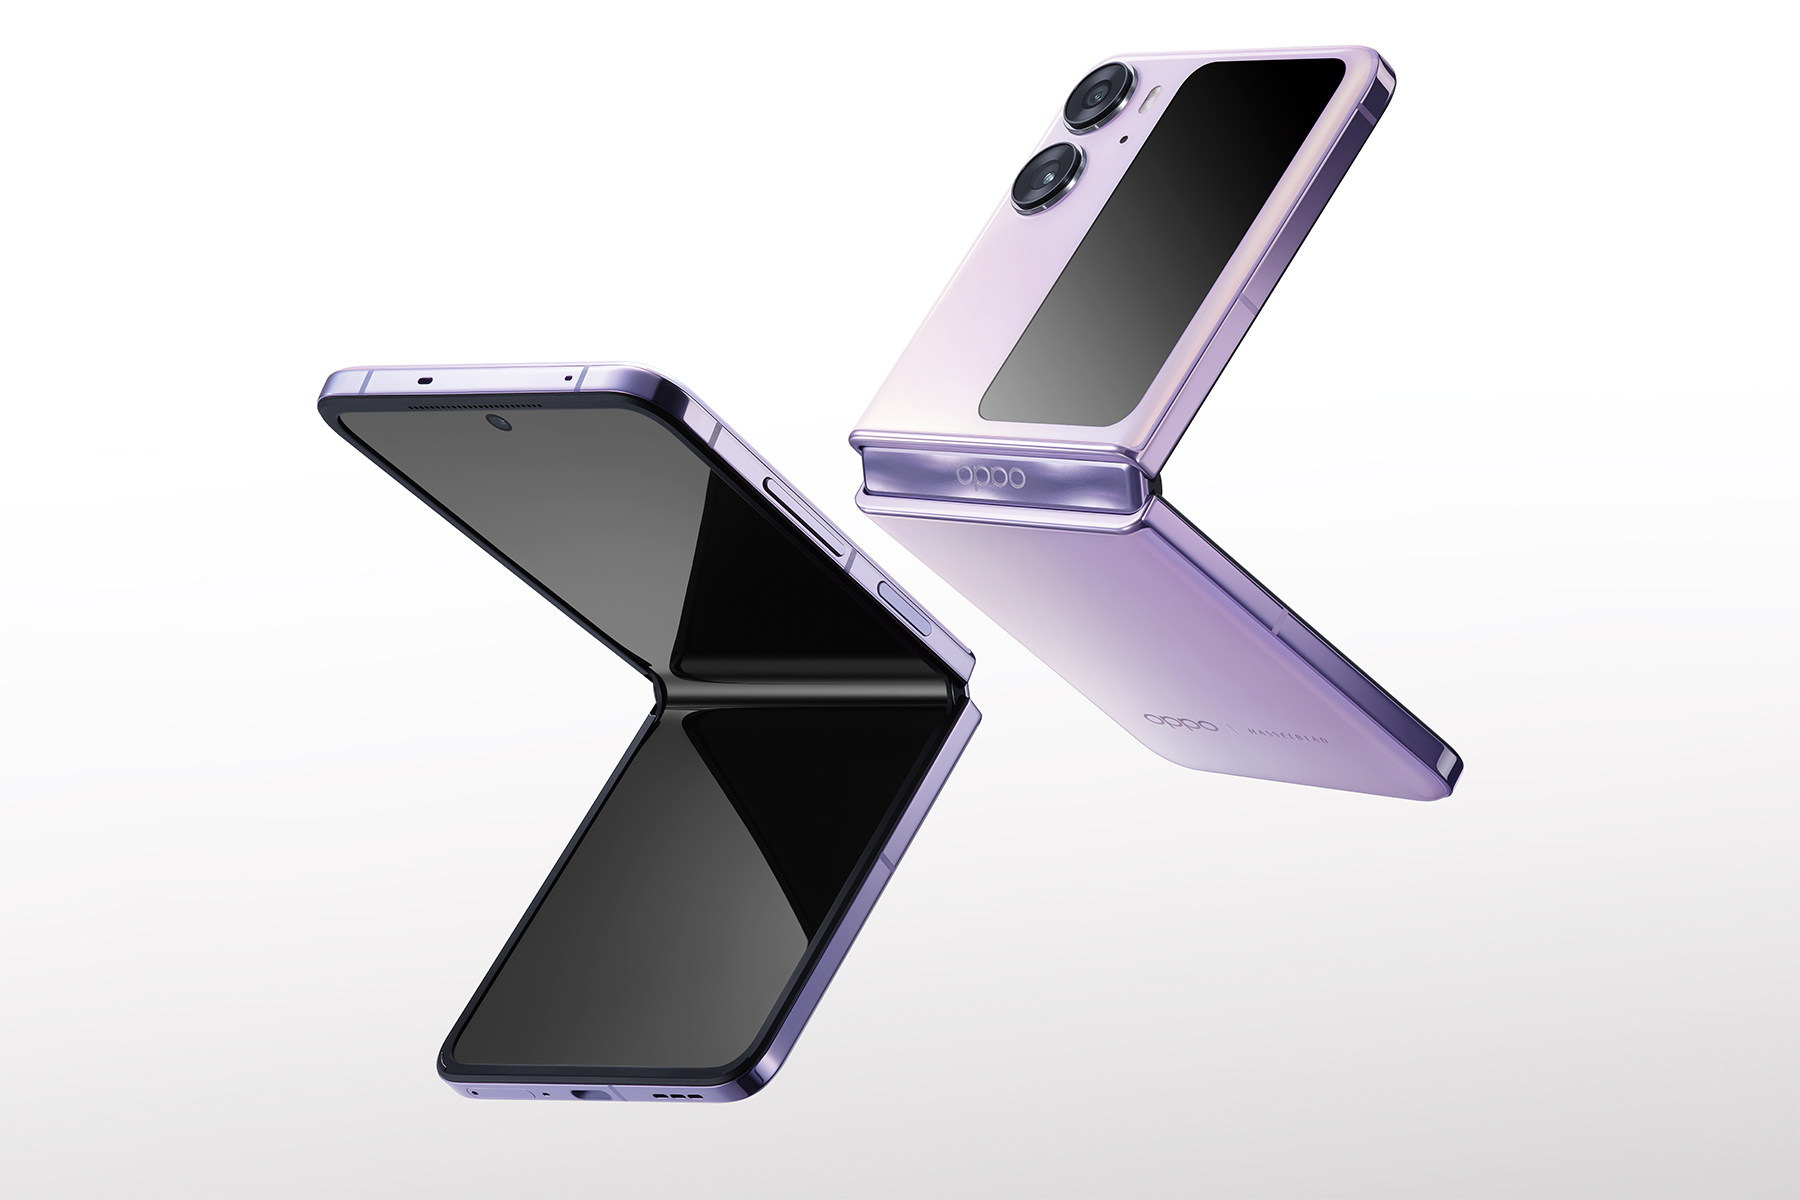 image of the Oppo Find N2 Flip Android smartphone in purple